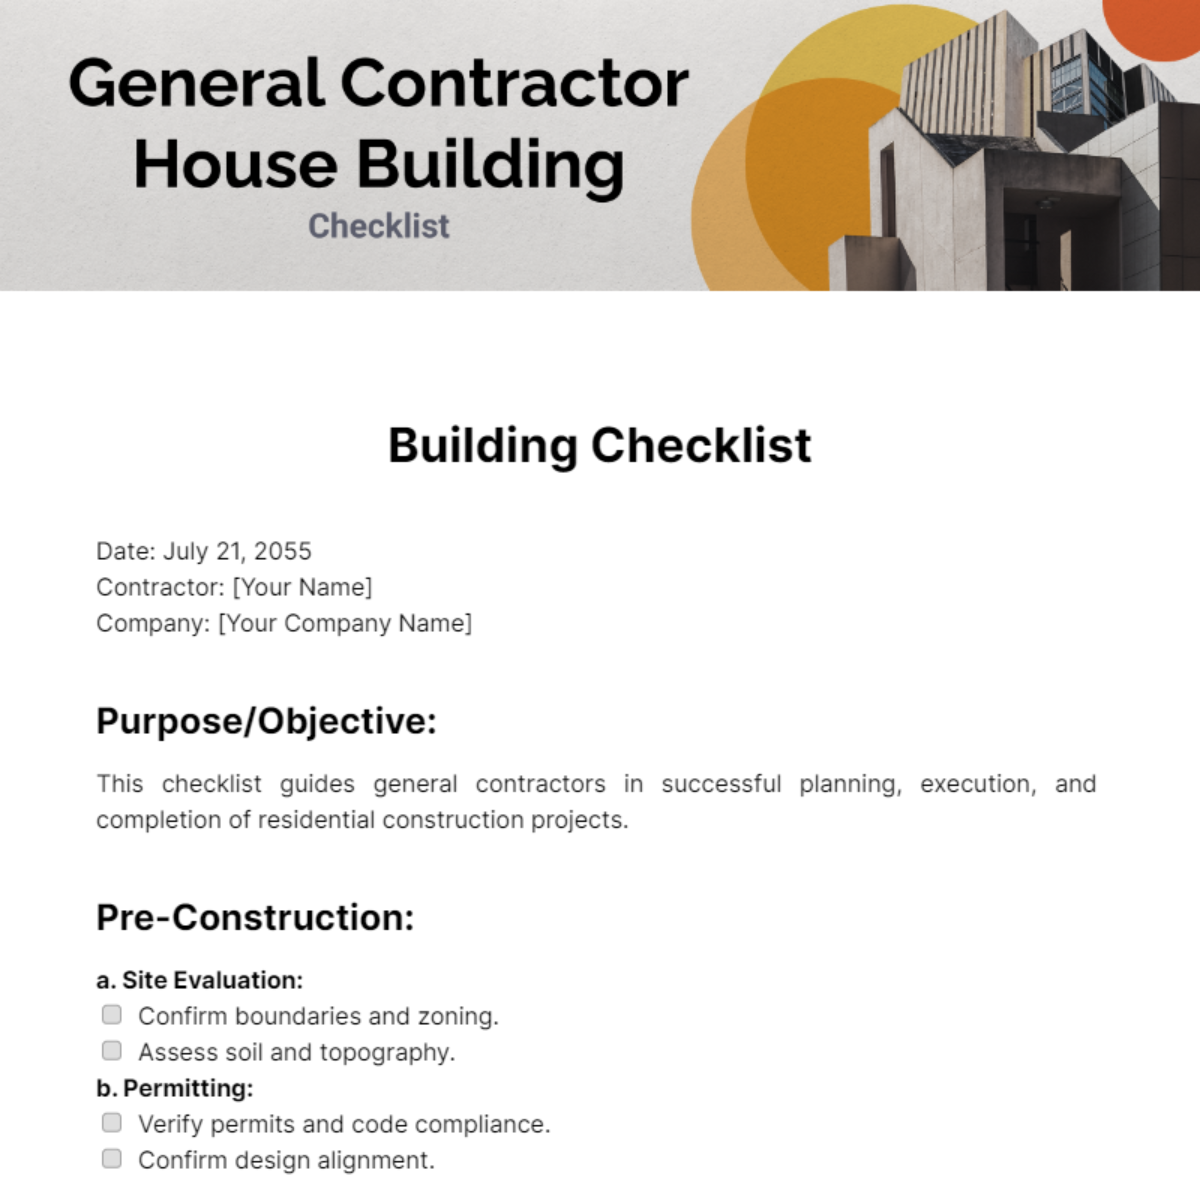 General Contractor House Building Checklist Template